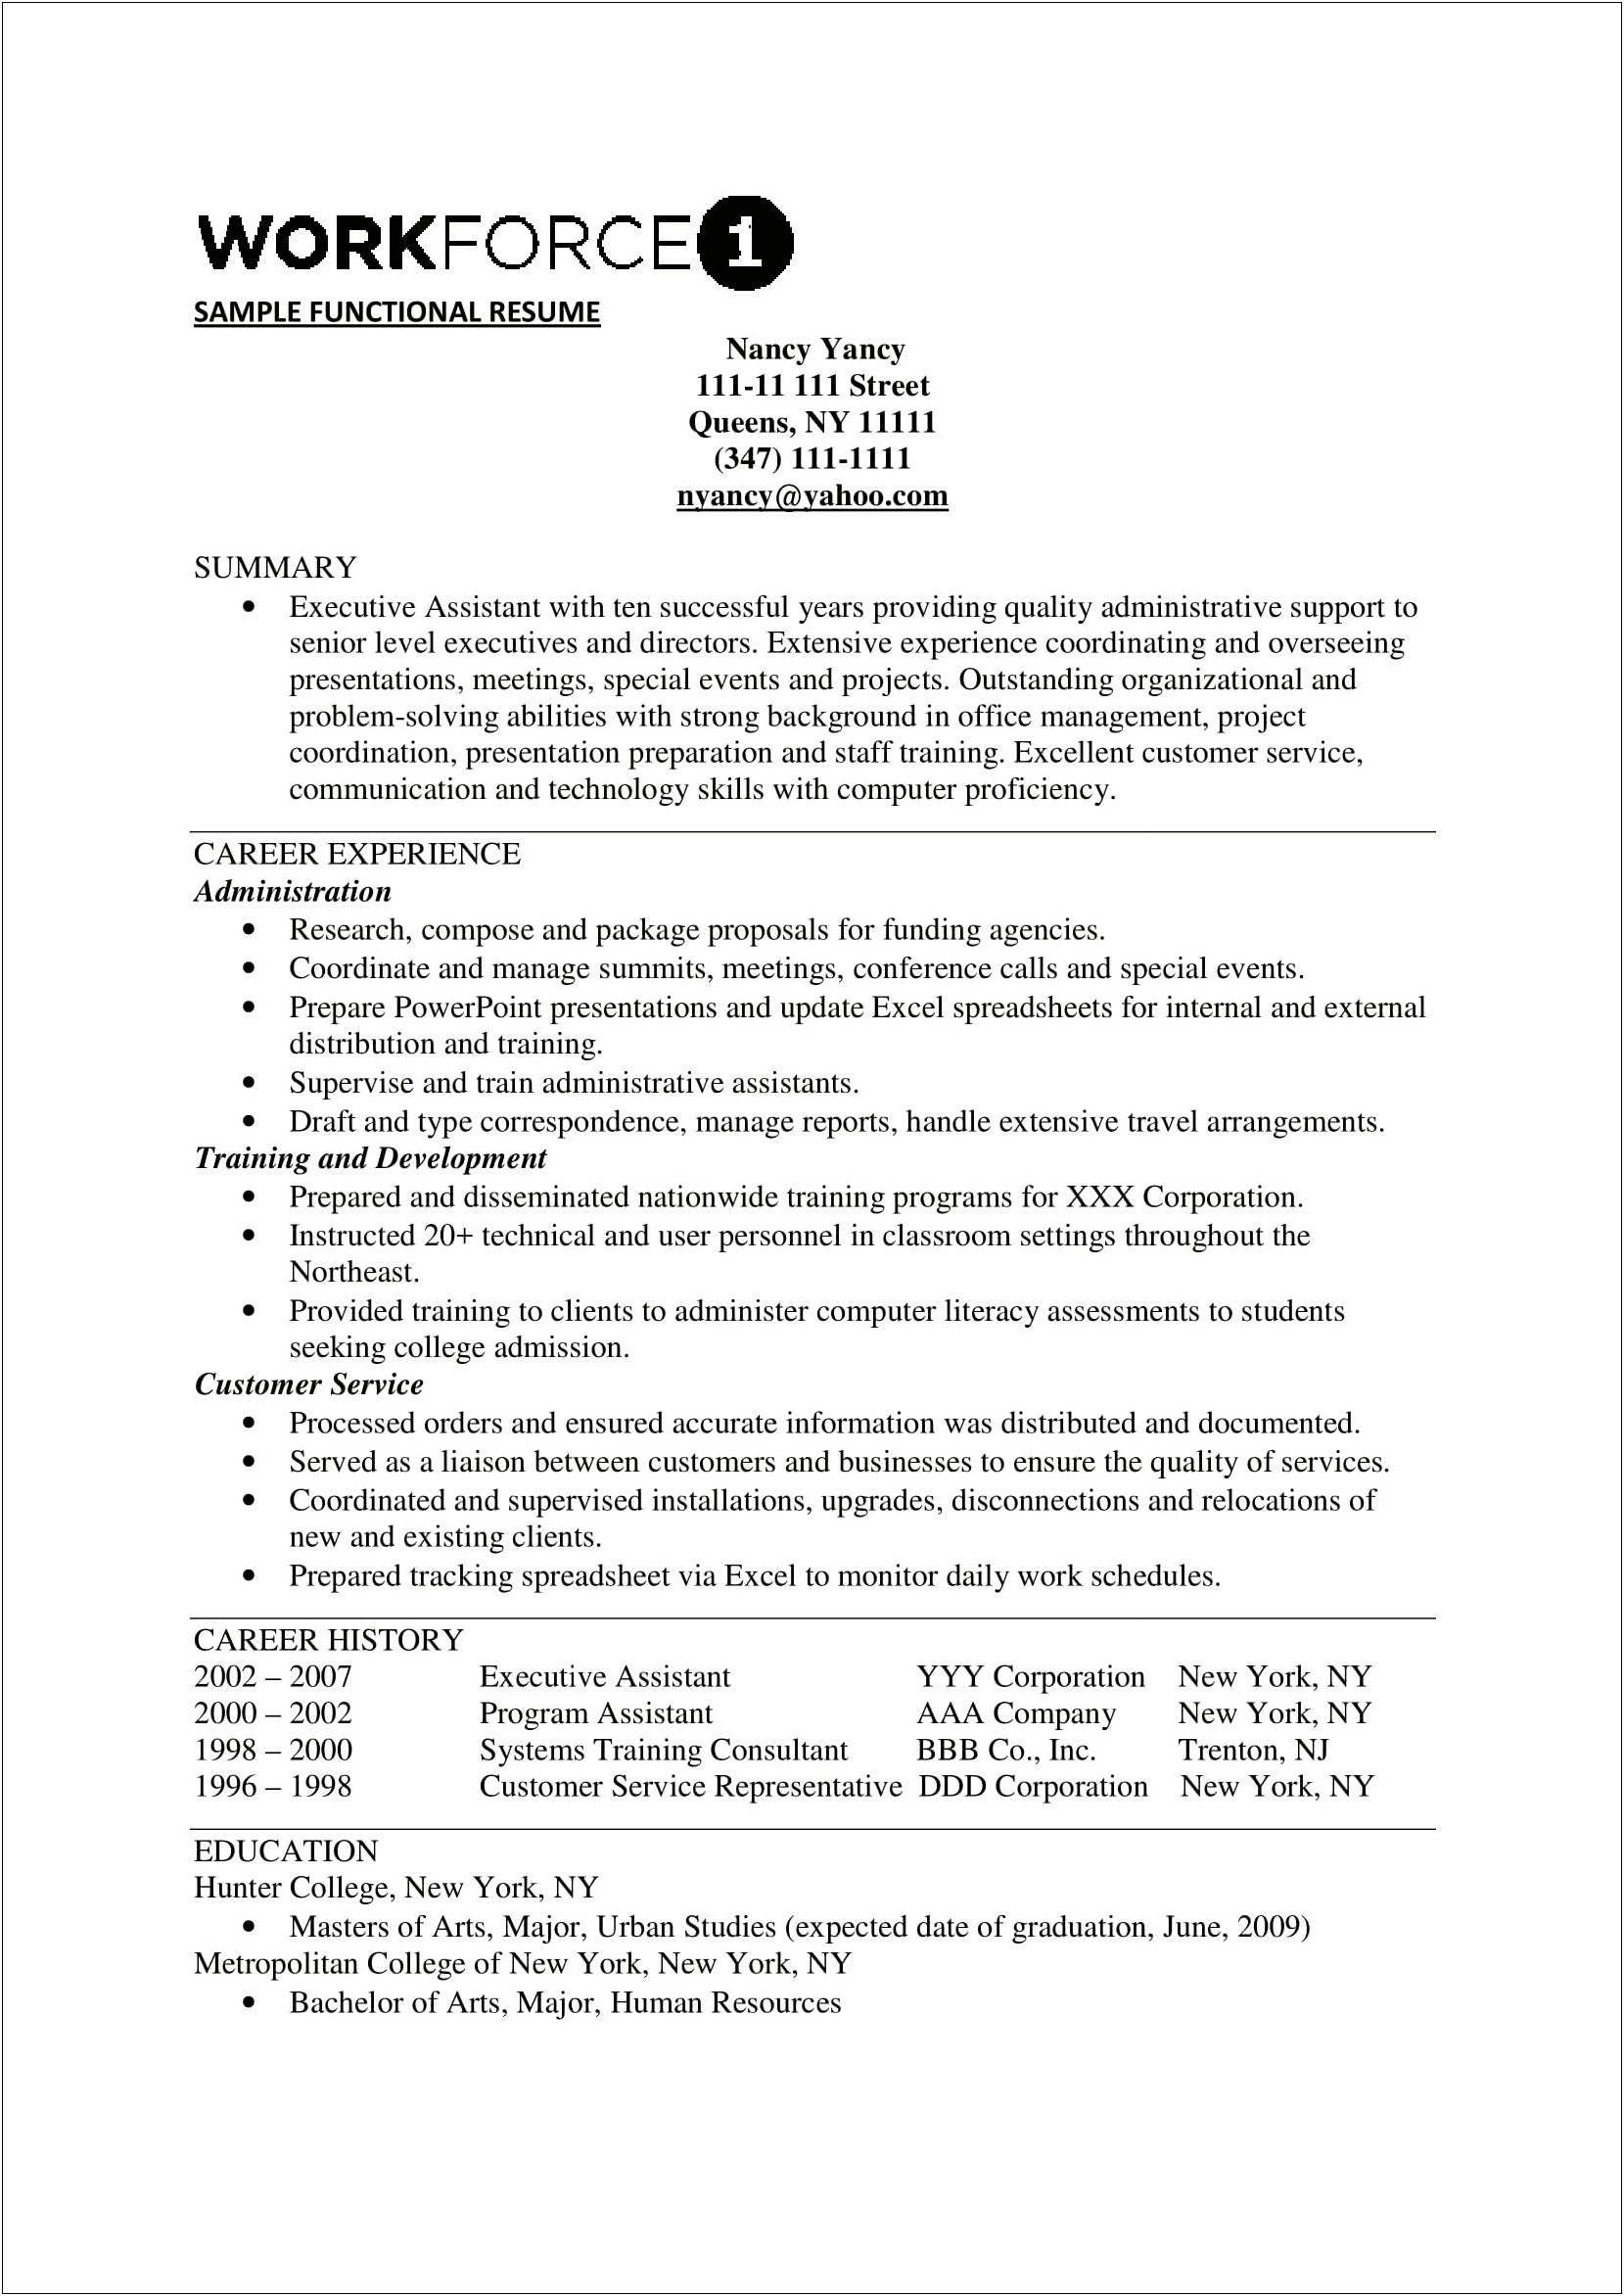 Writing A Personal Summary For A Resume